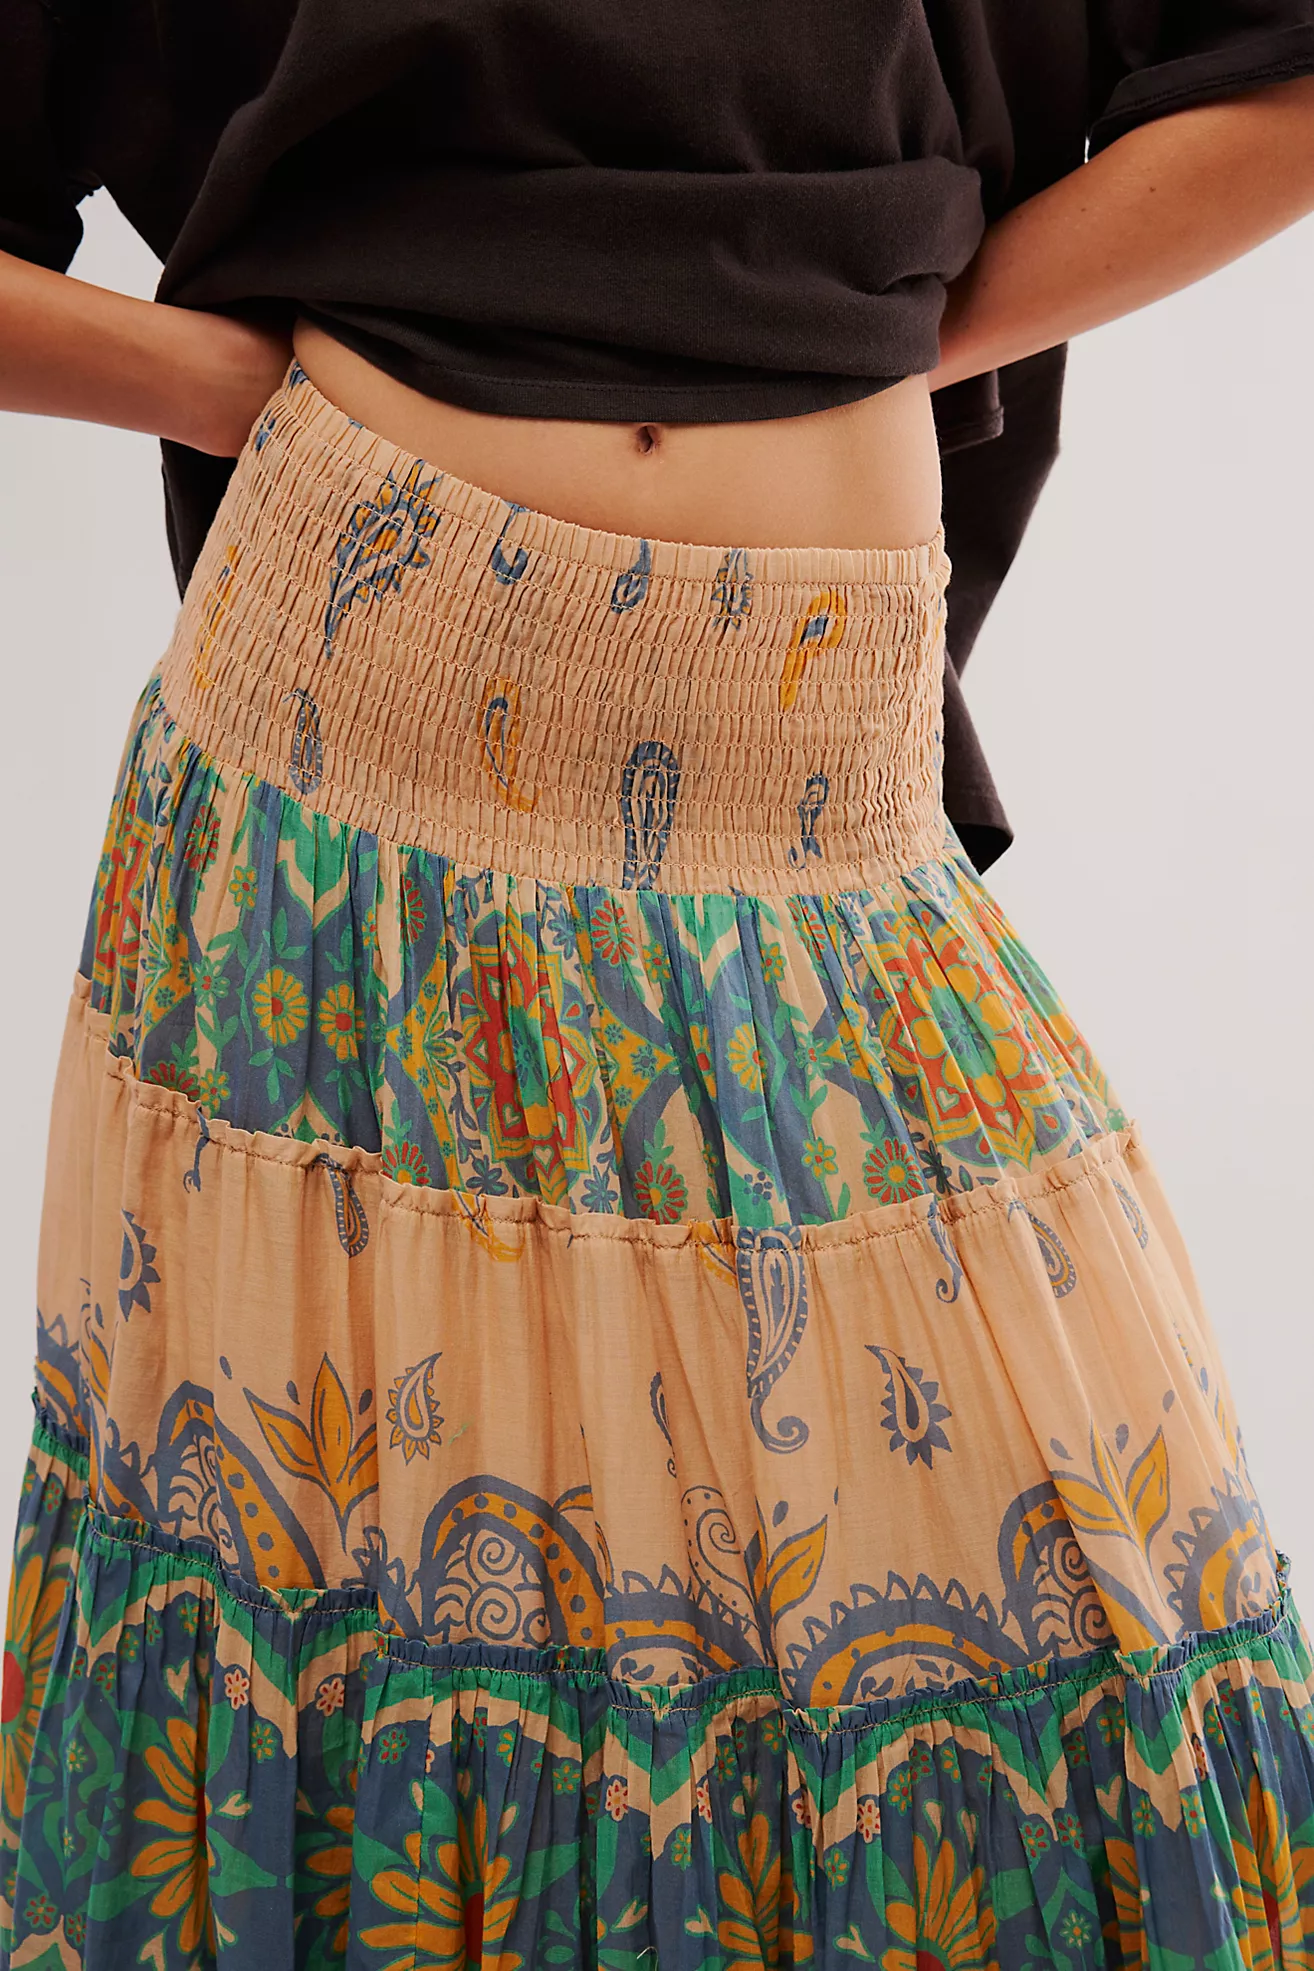 FREE PEOPLE SUPER THRILLS MAXI SKIRT IN BLUE SKY COMBO